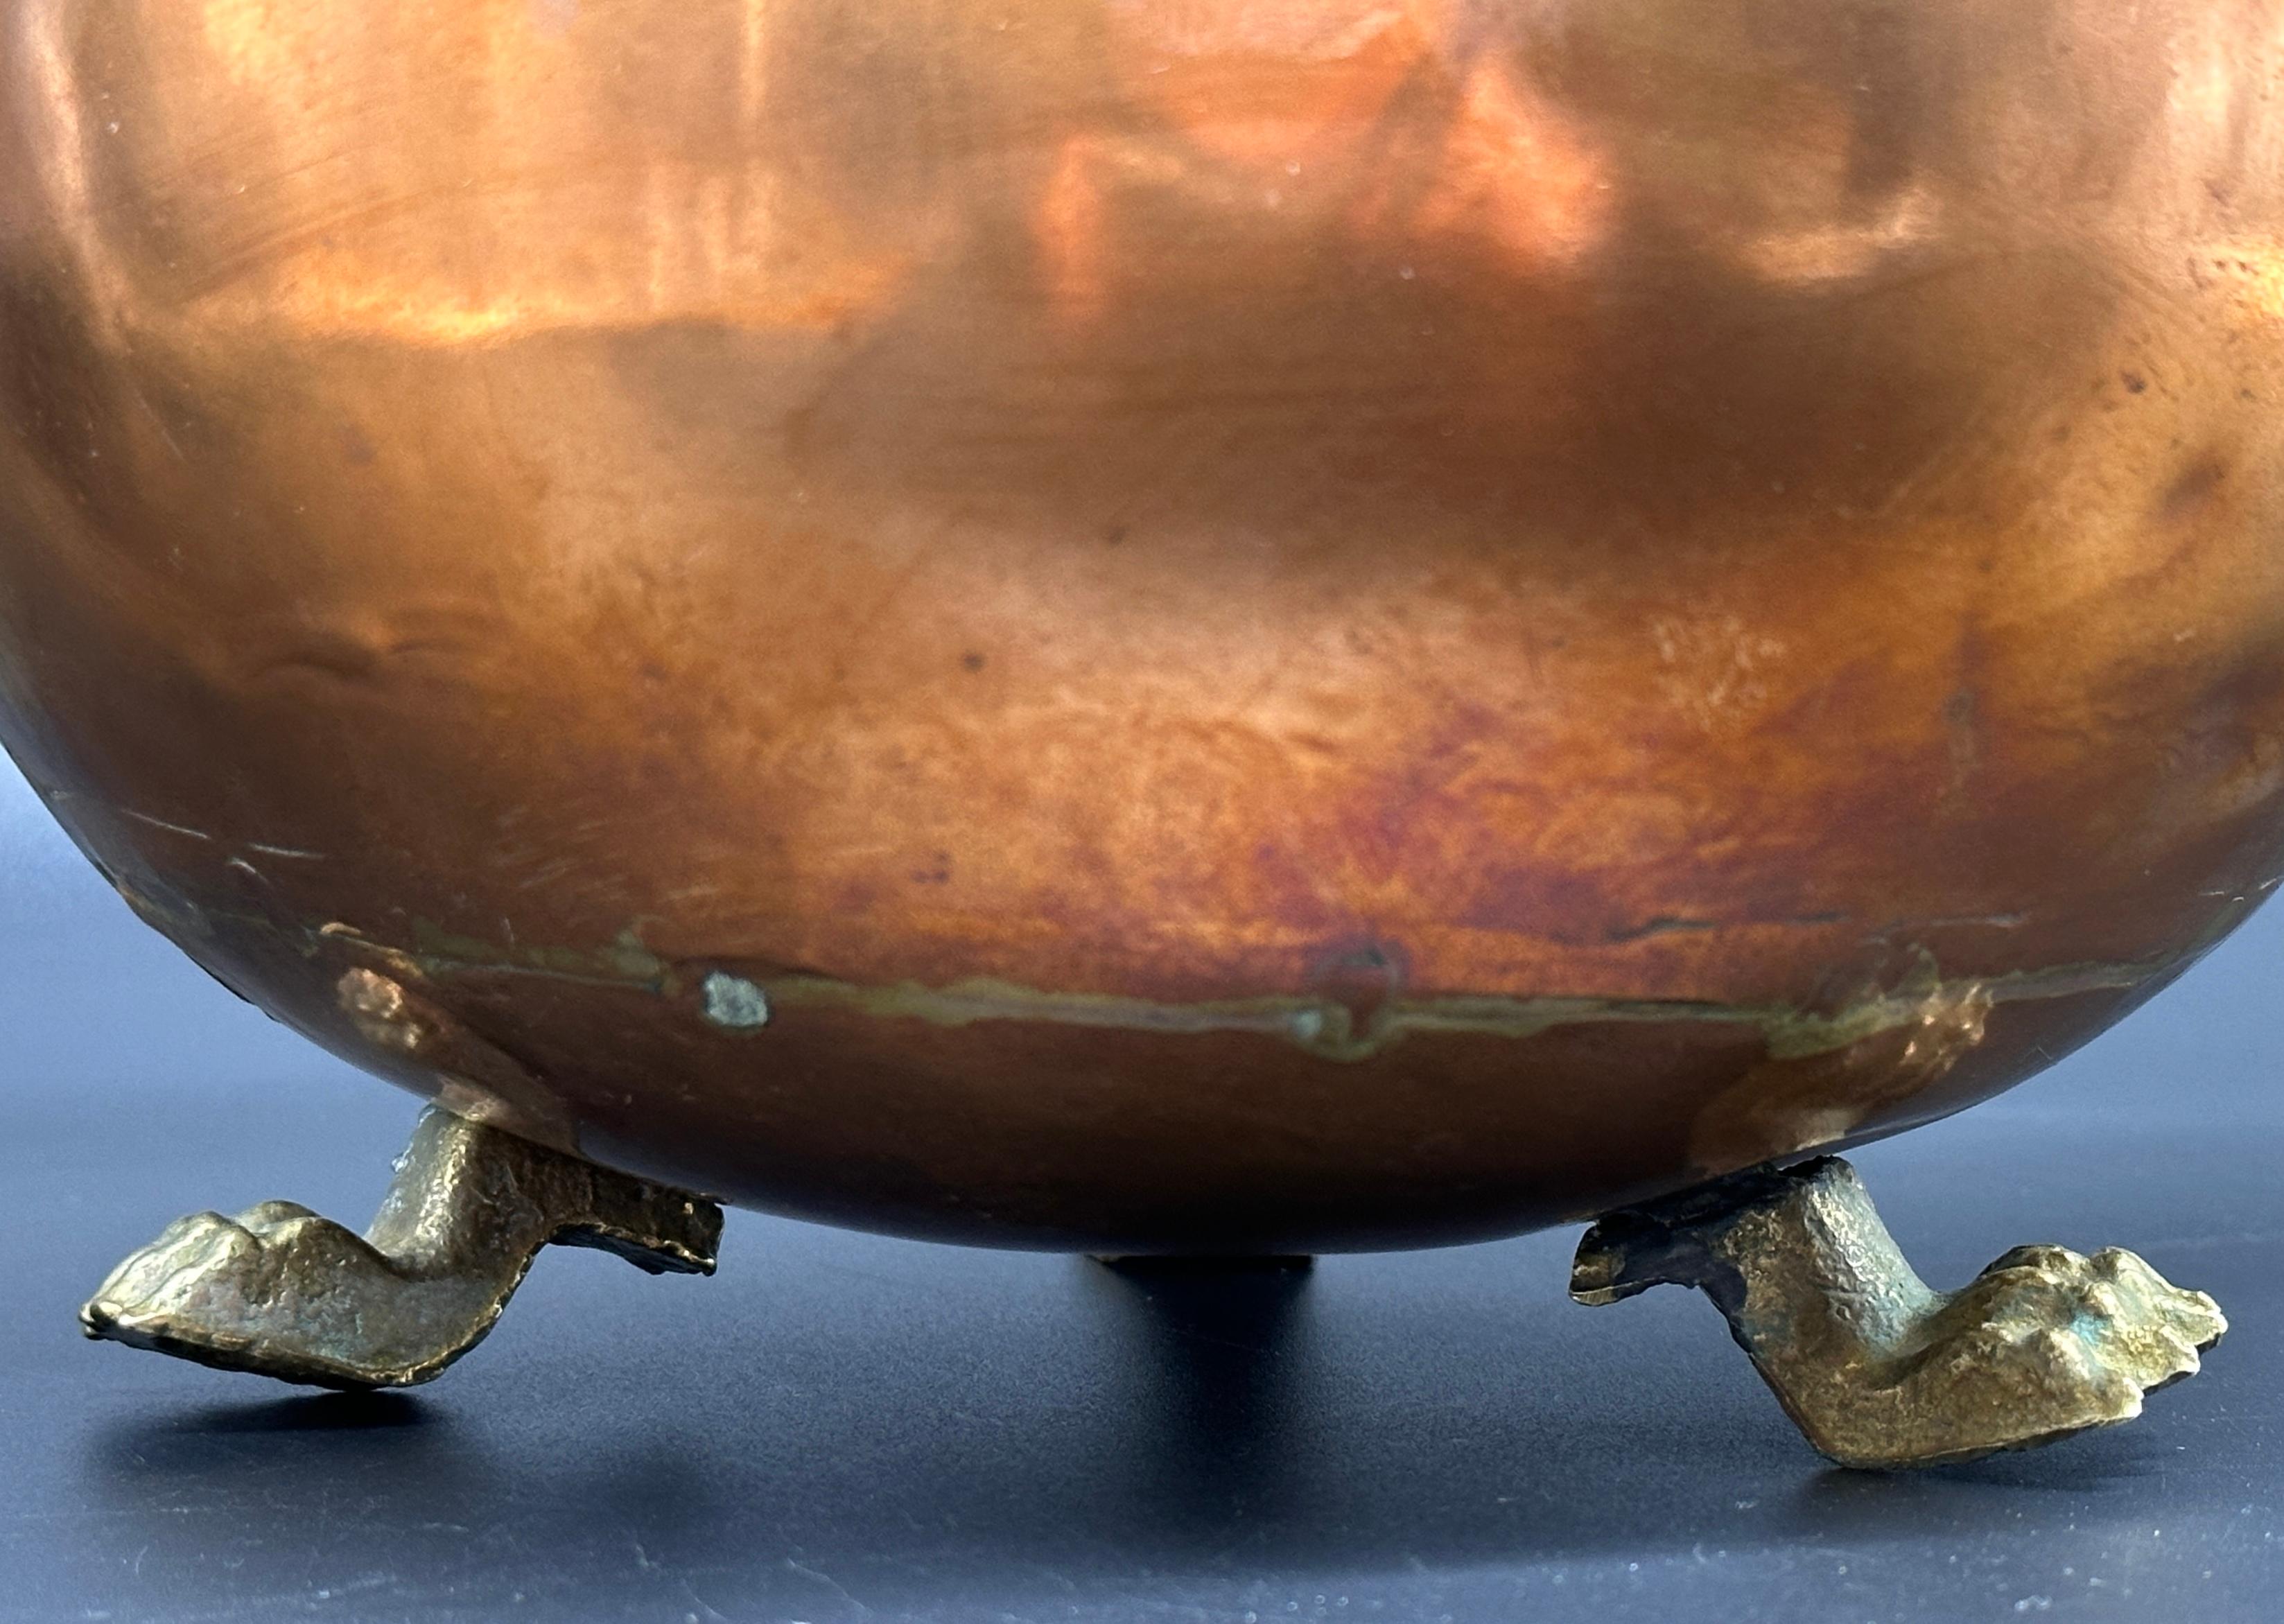 Double Handle Footed Copper Pot